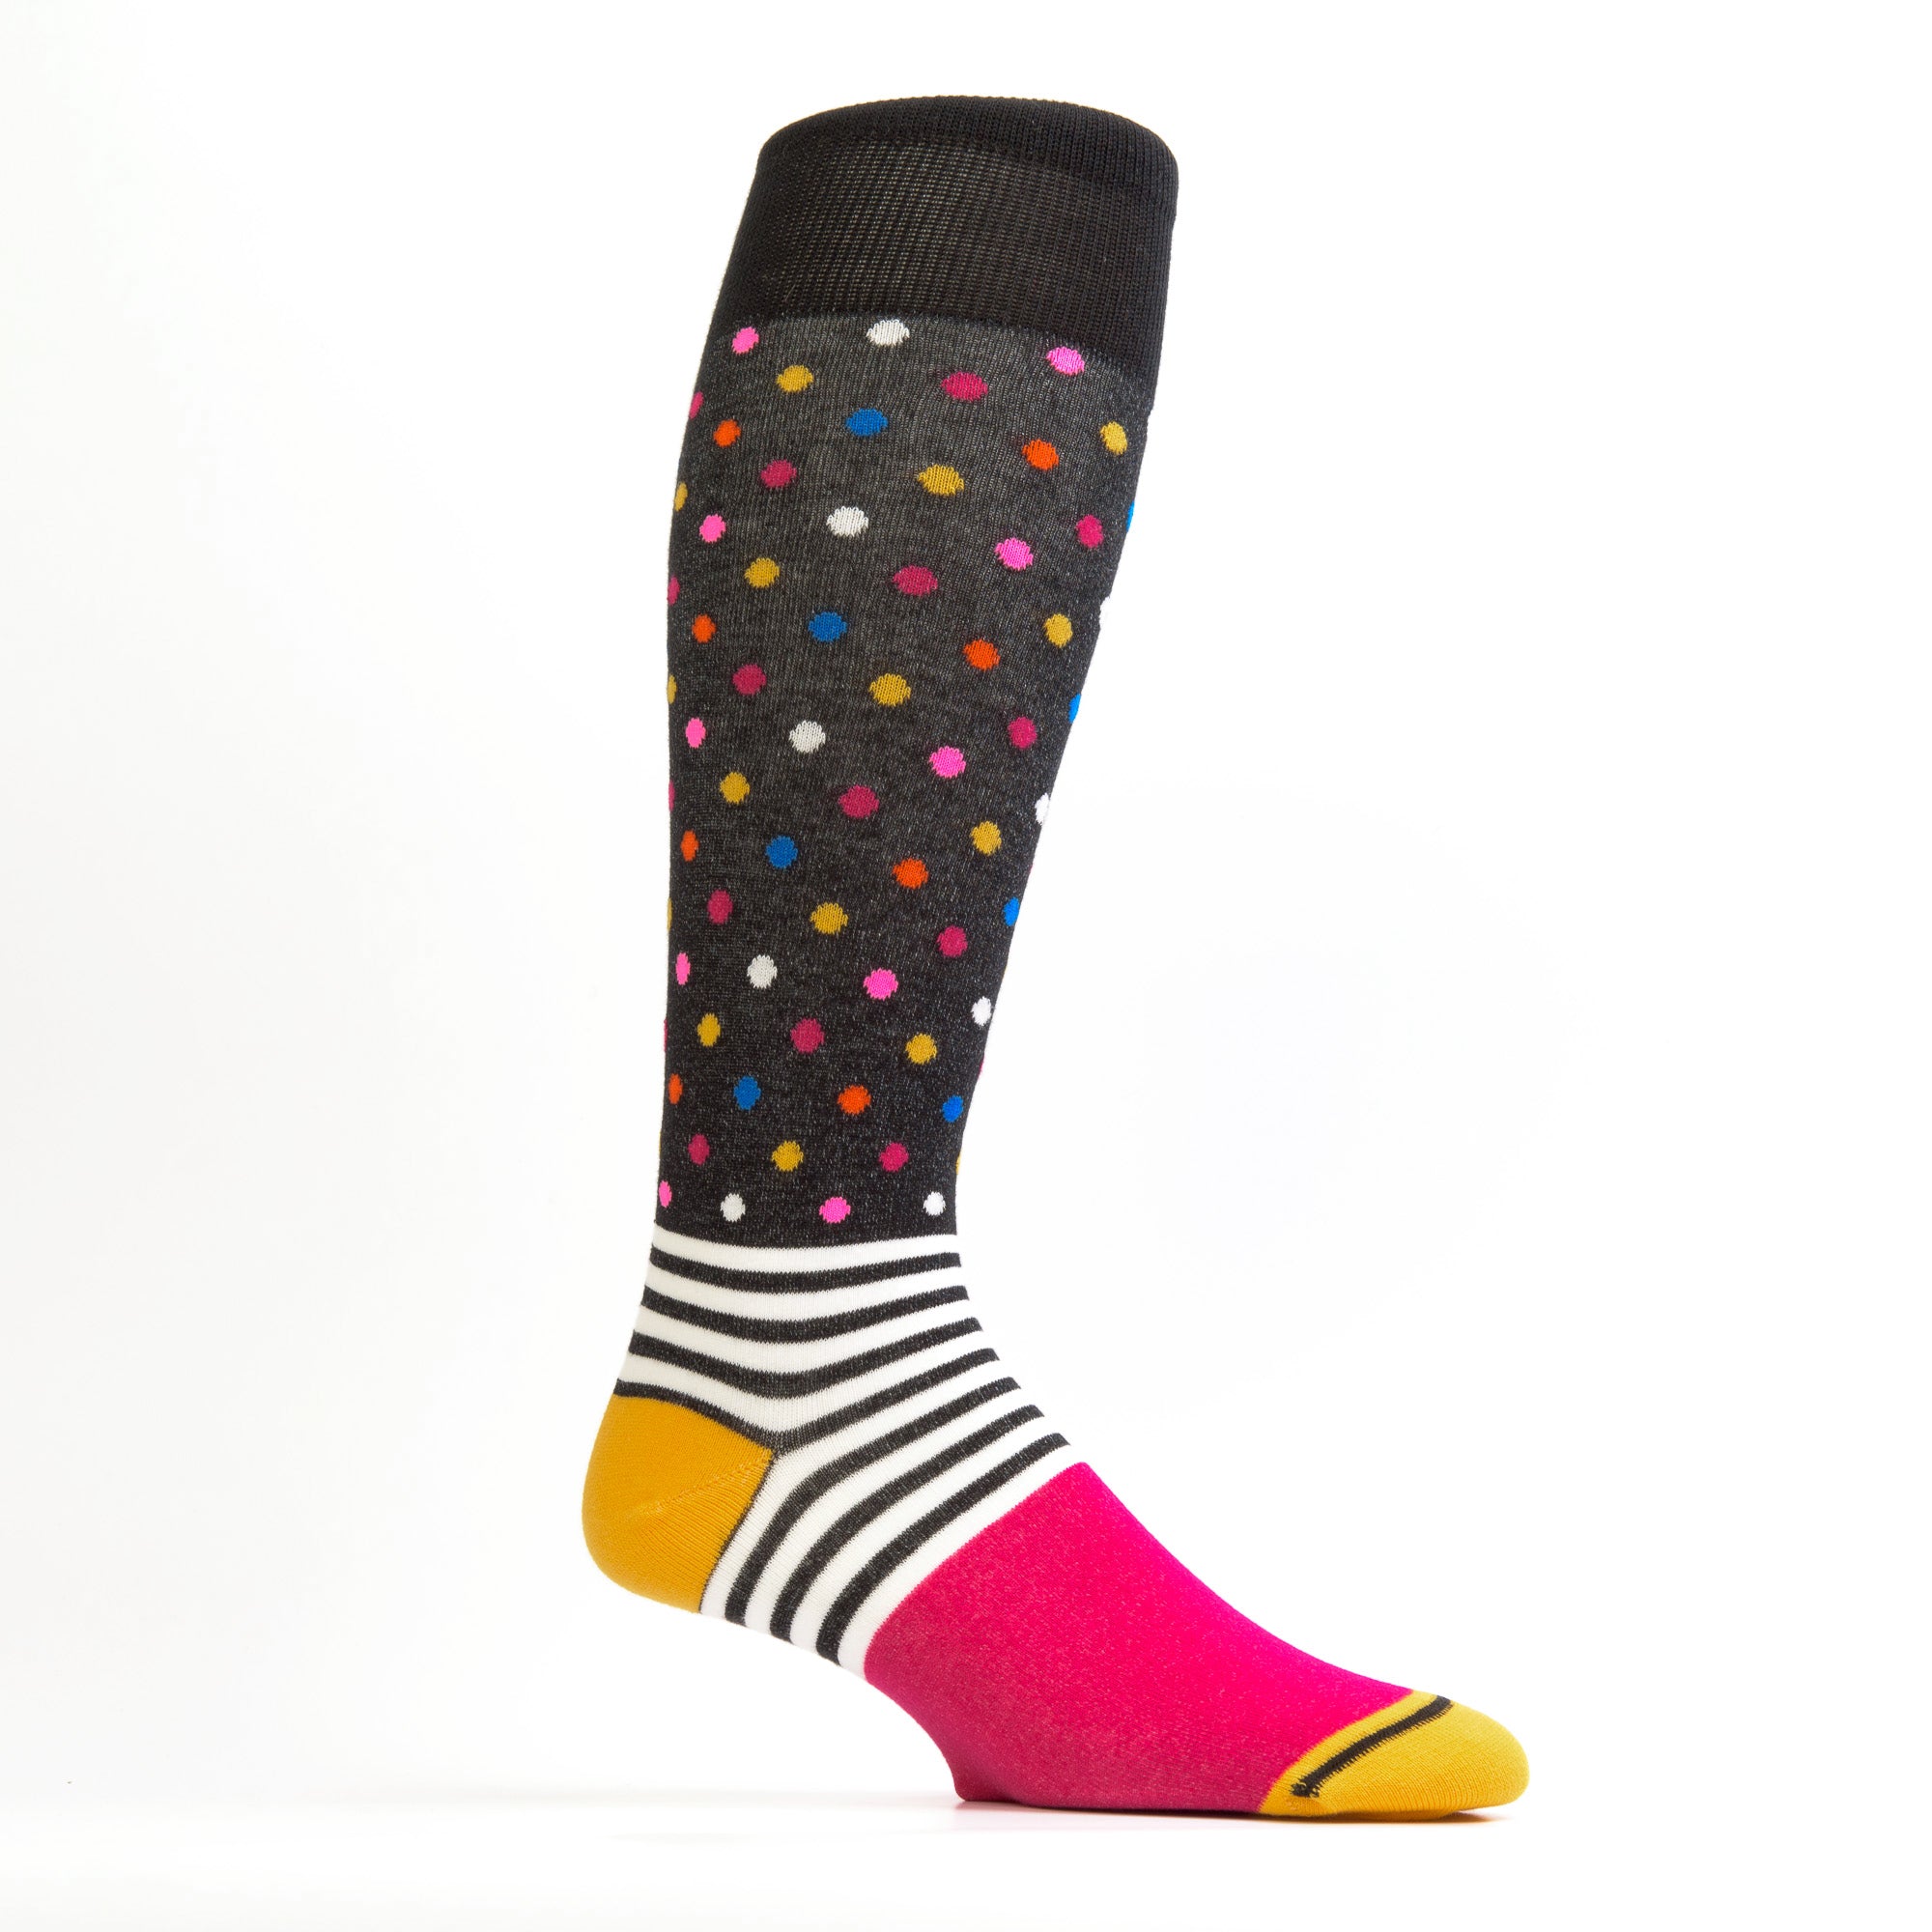 Zicci Women's 5-Pair Dots and Lines Knee High Socks